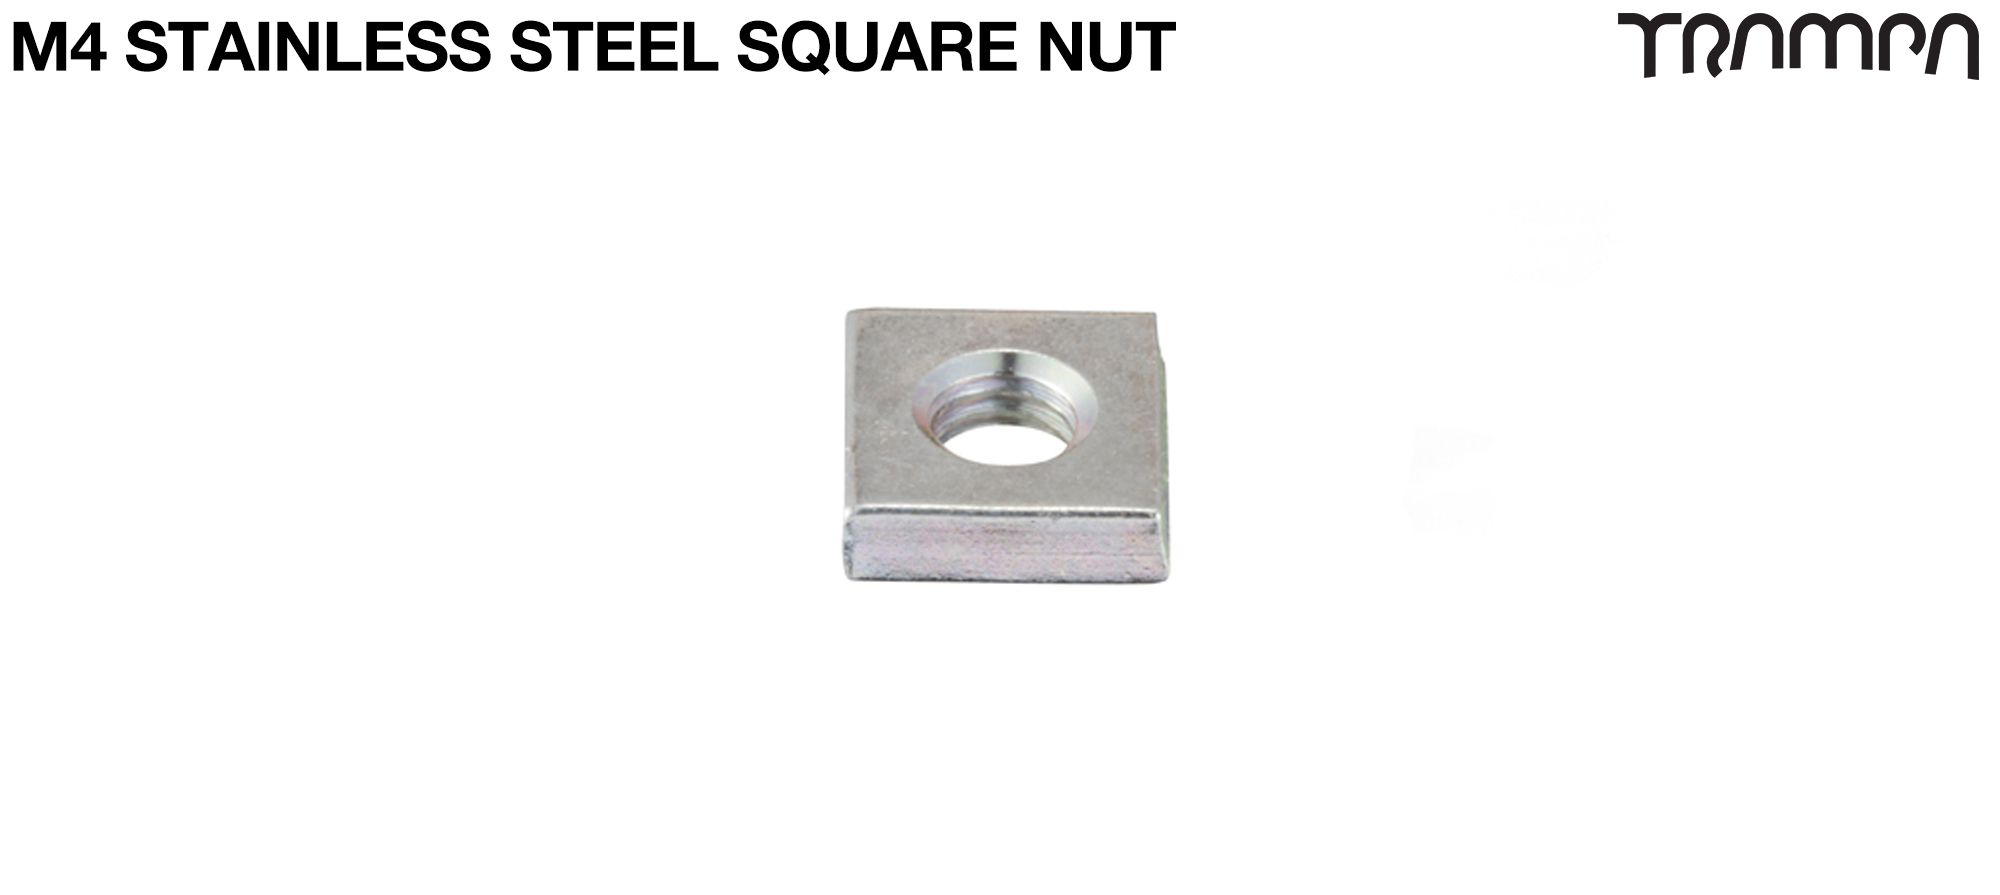 M4 Stainless Steel Square nut - secures the inspection pit LID to the Box its fitting to